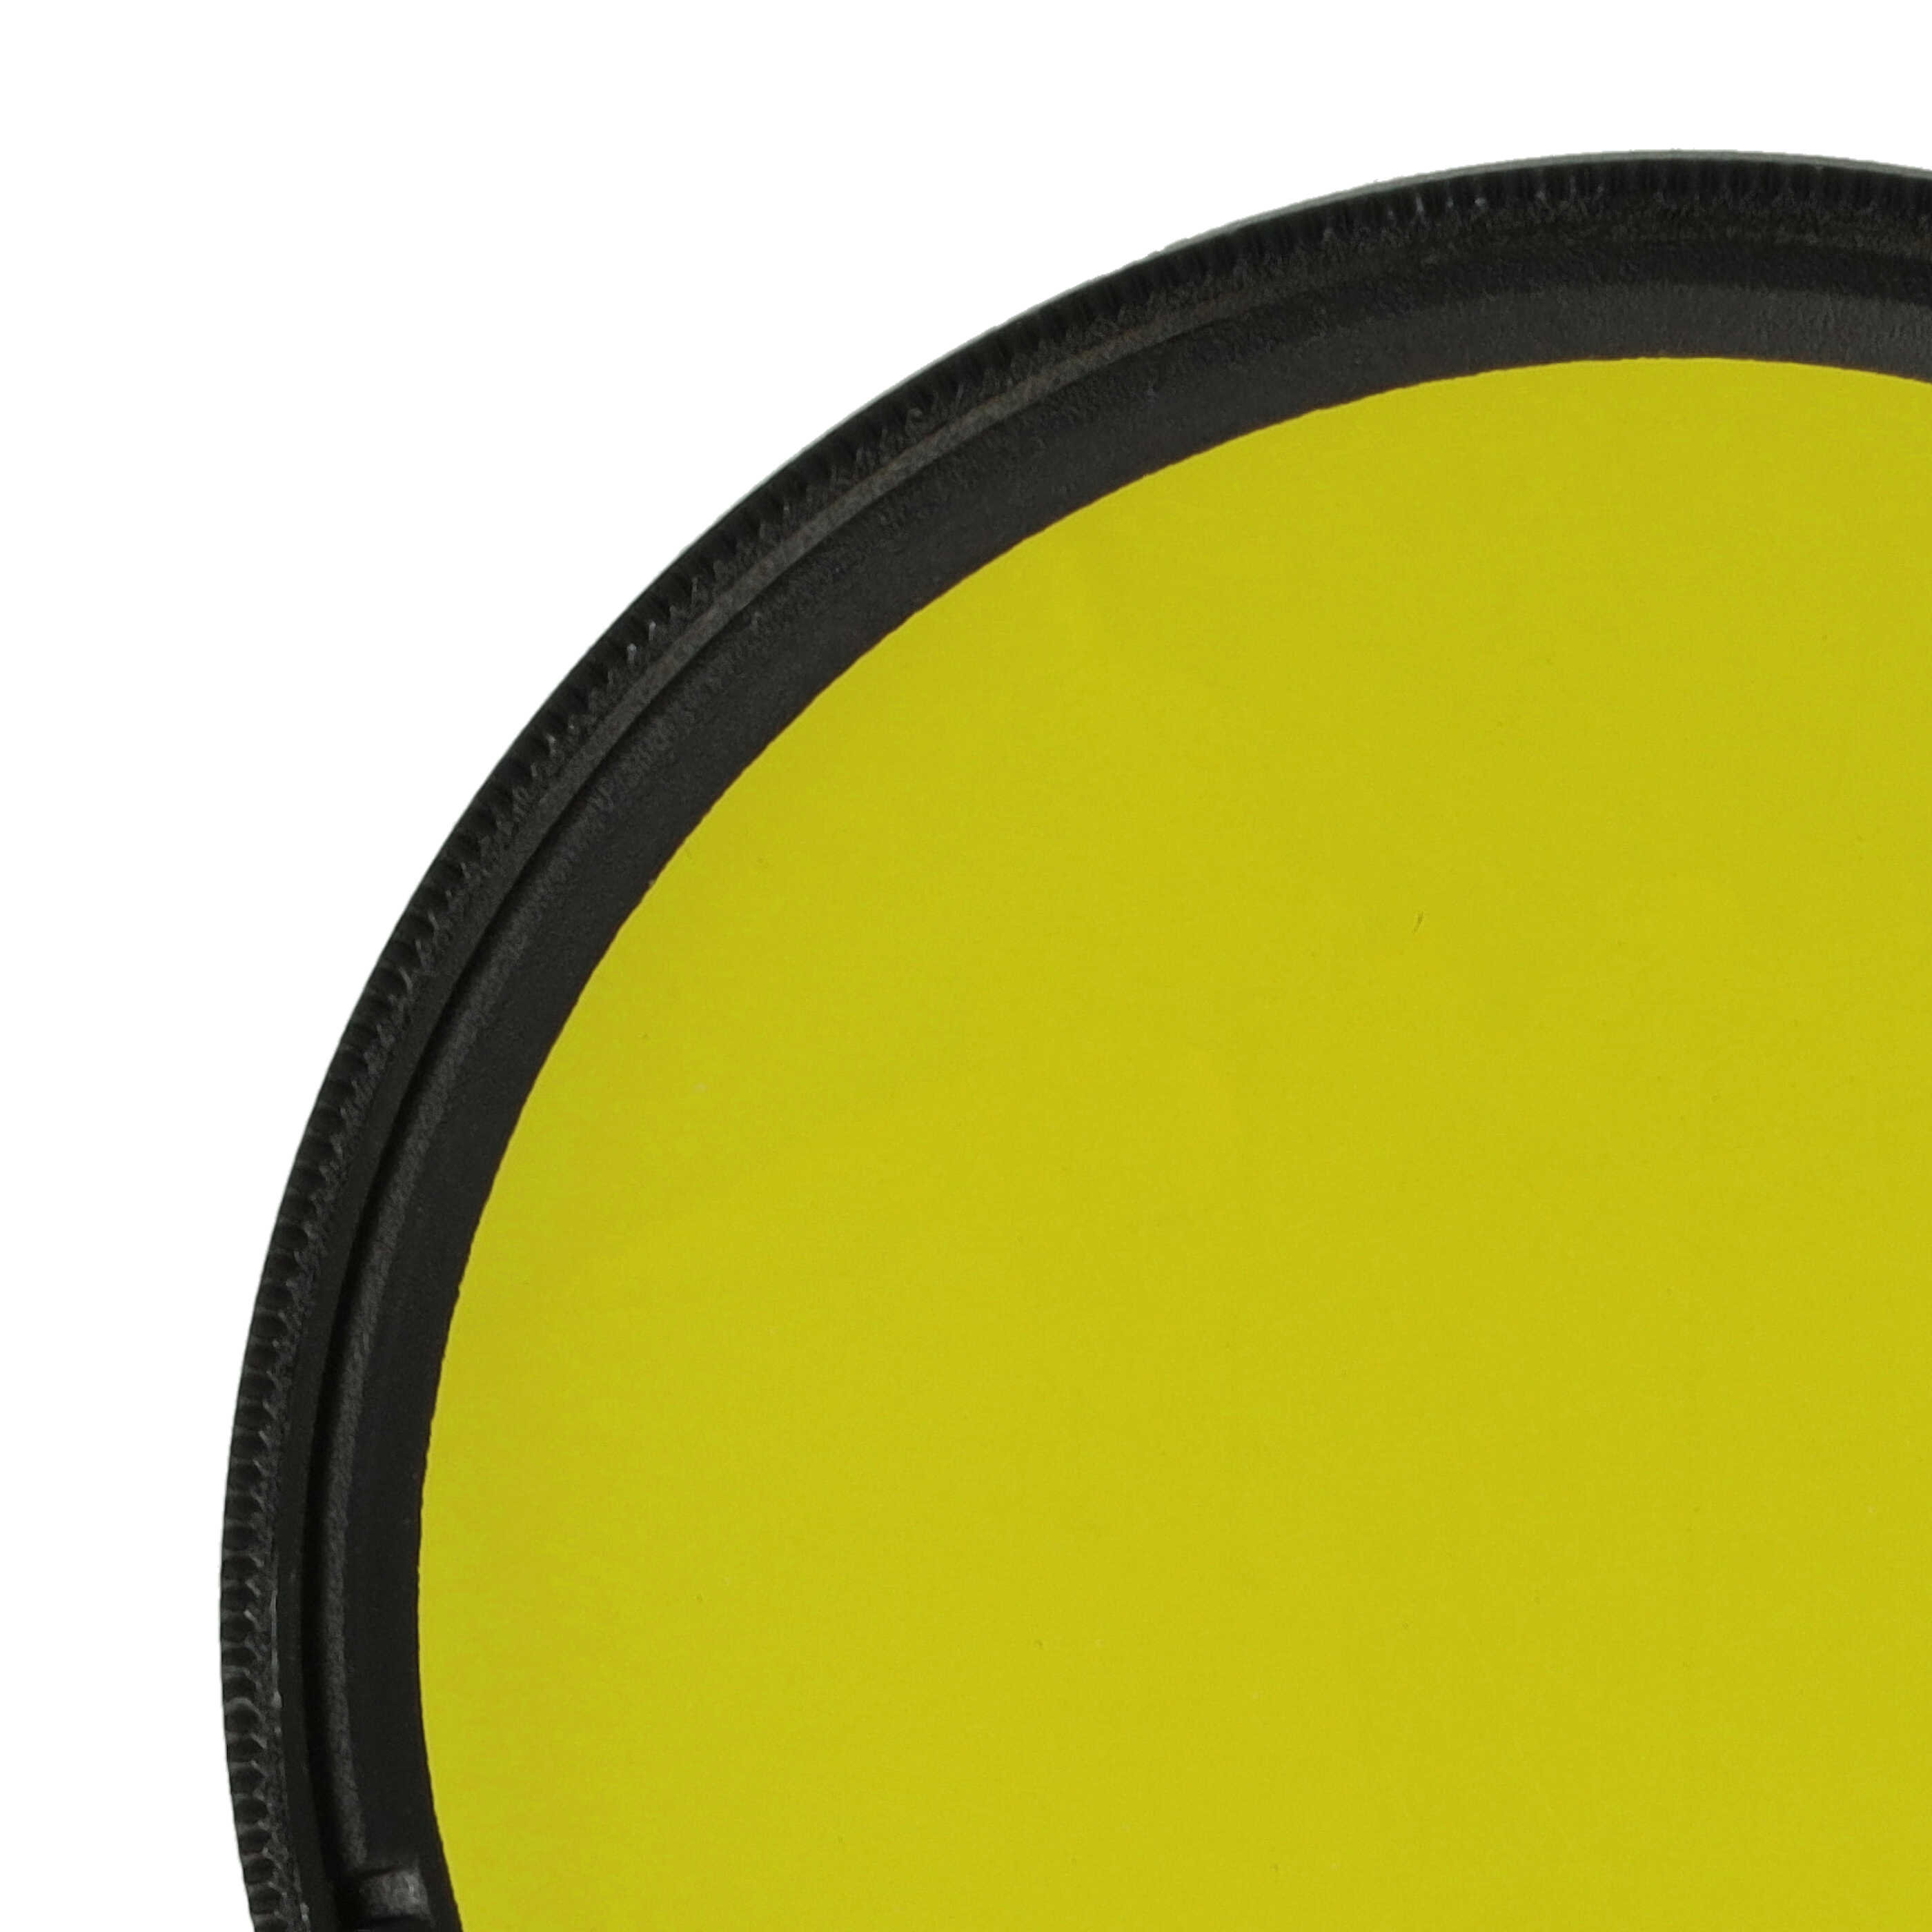 Coloured Filter, Yellow suitable for Camera Lenses with 55 mm Filter Thread - Yellow Filter